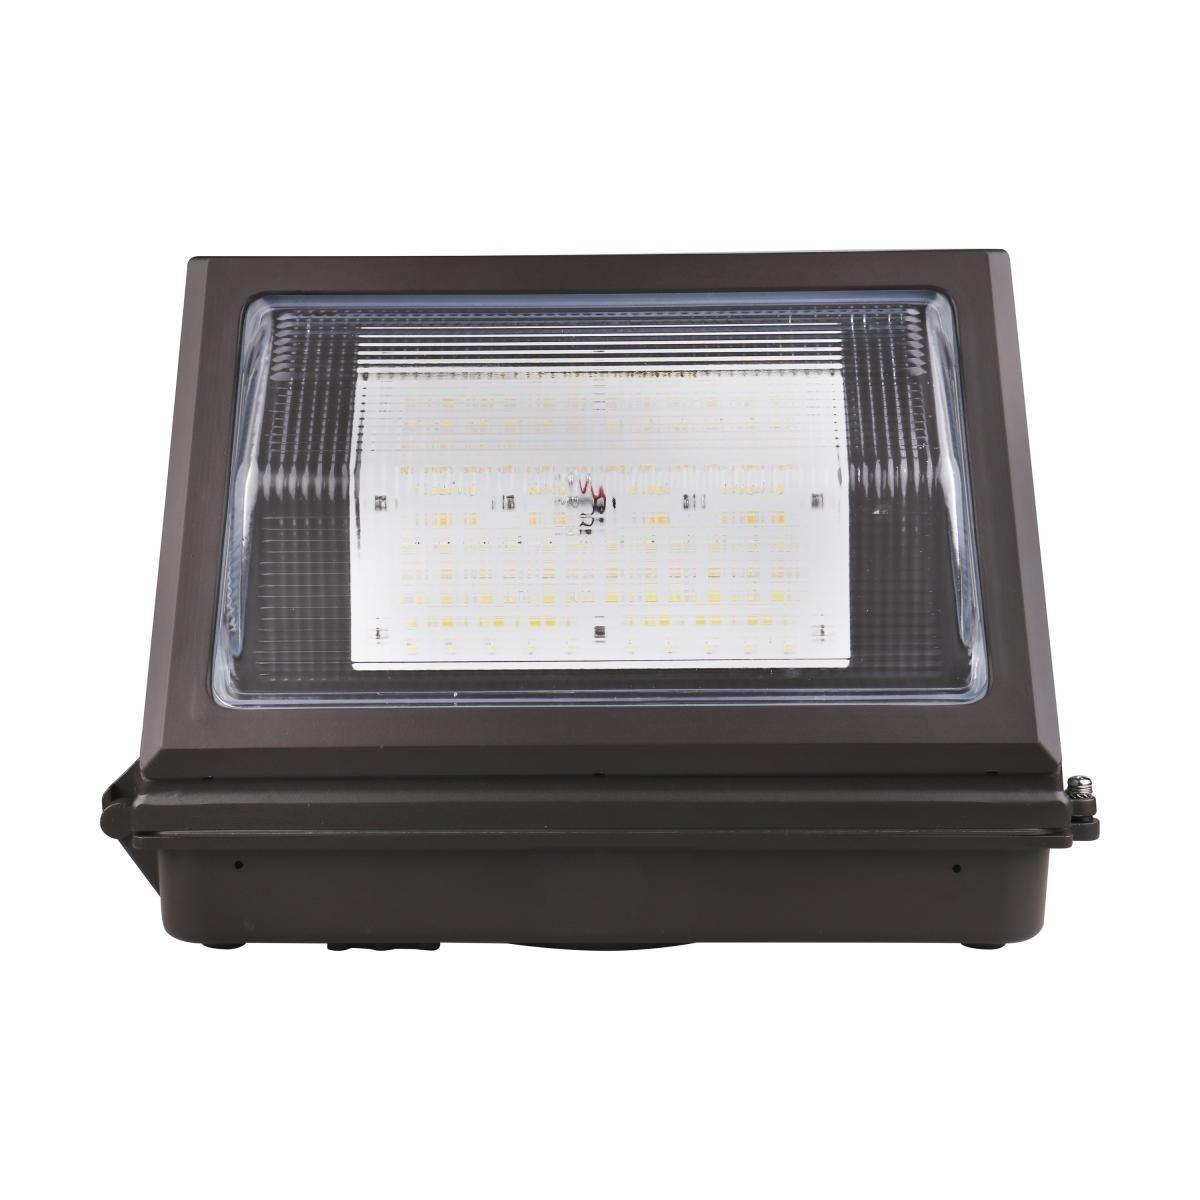 LED Standard Wall Pack With Photocell 60 Watts Adjustable 8,400 Lumens 30K/40K/50K Battery Included 120-277V - Bees Lighting